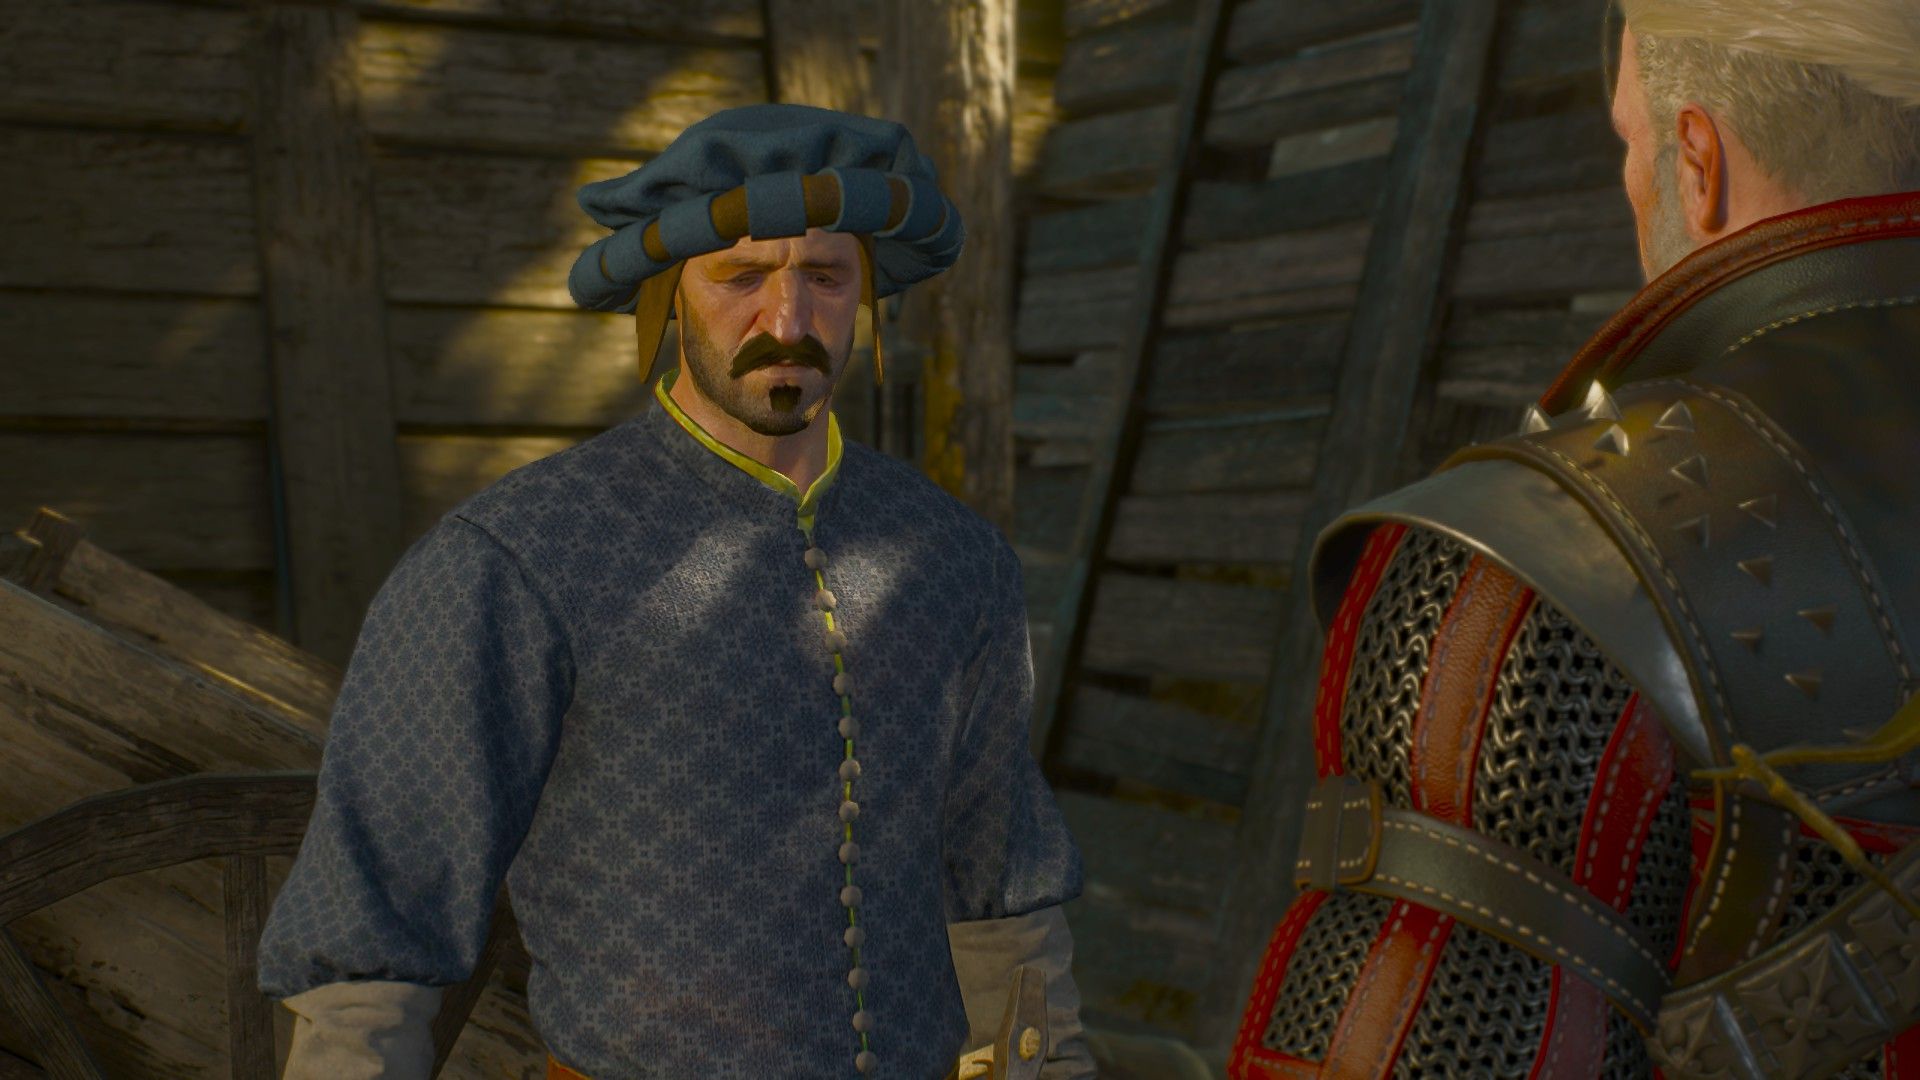 A well-dressed man in blue talks to Geralt at a work site in Toussaint.